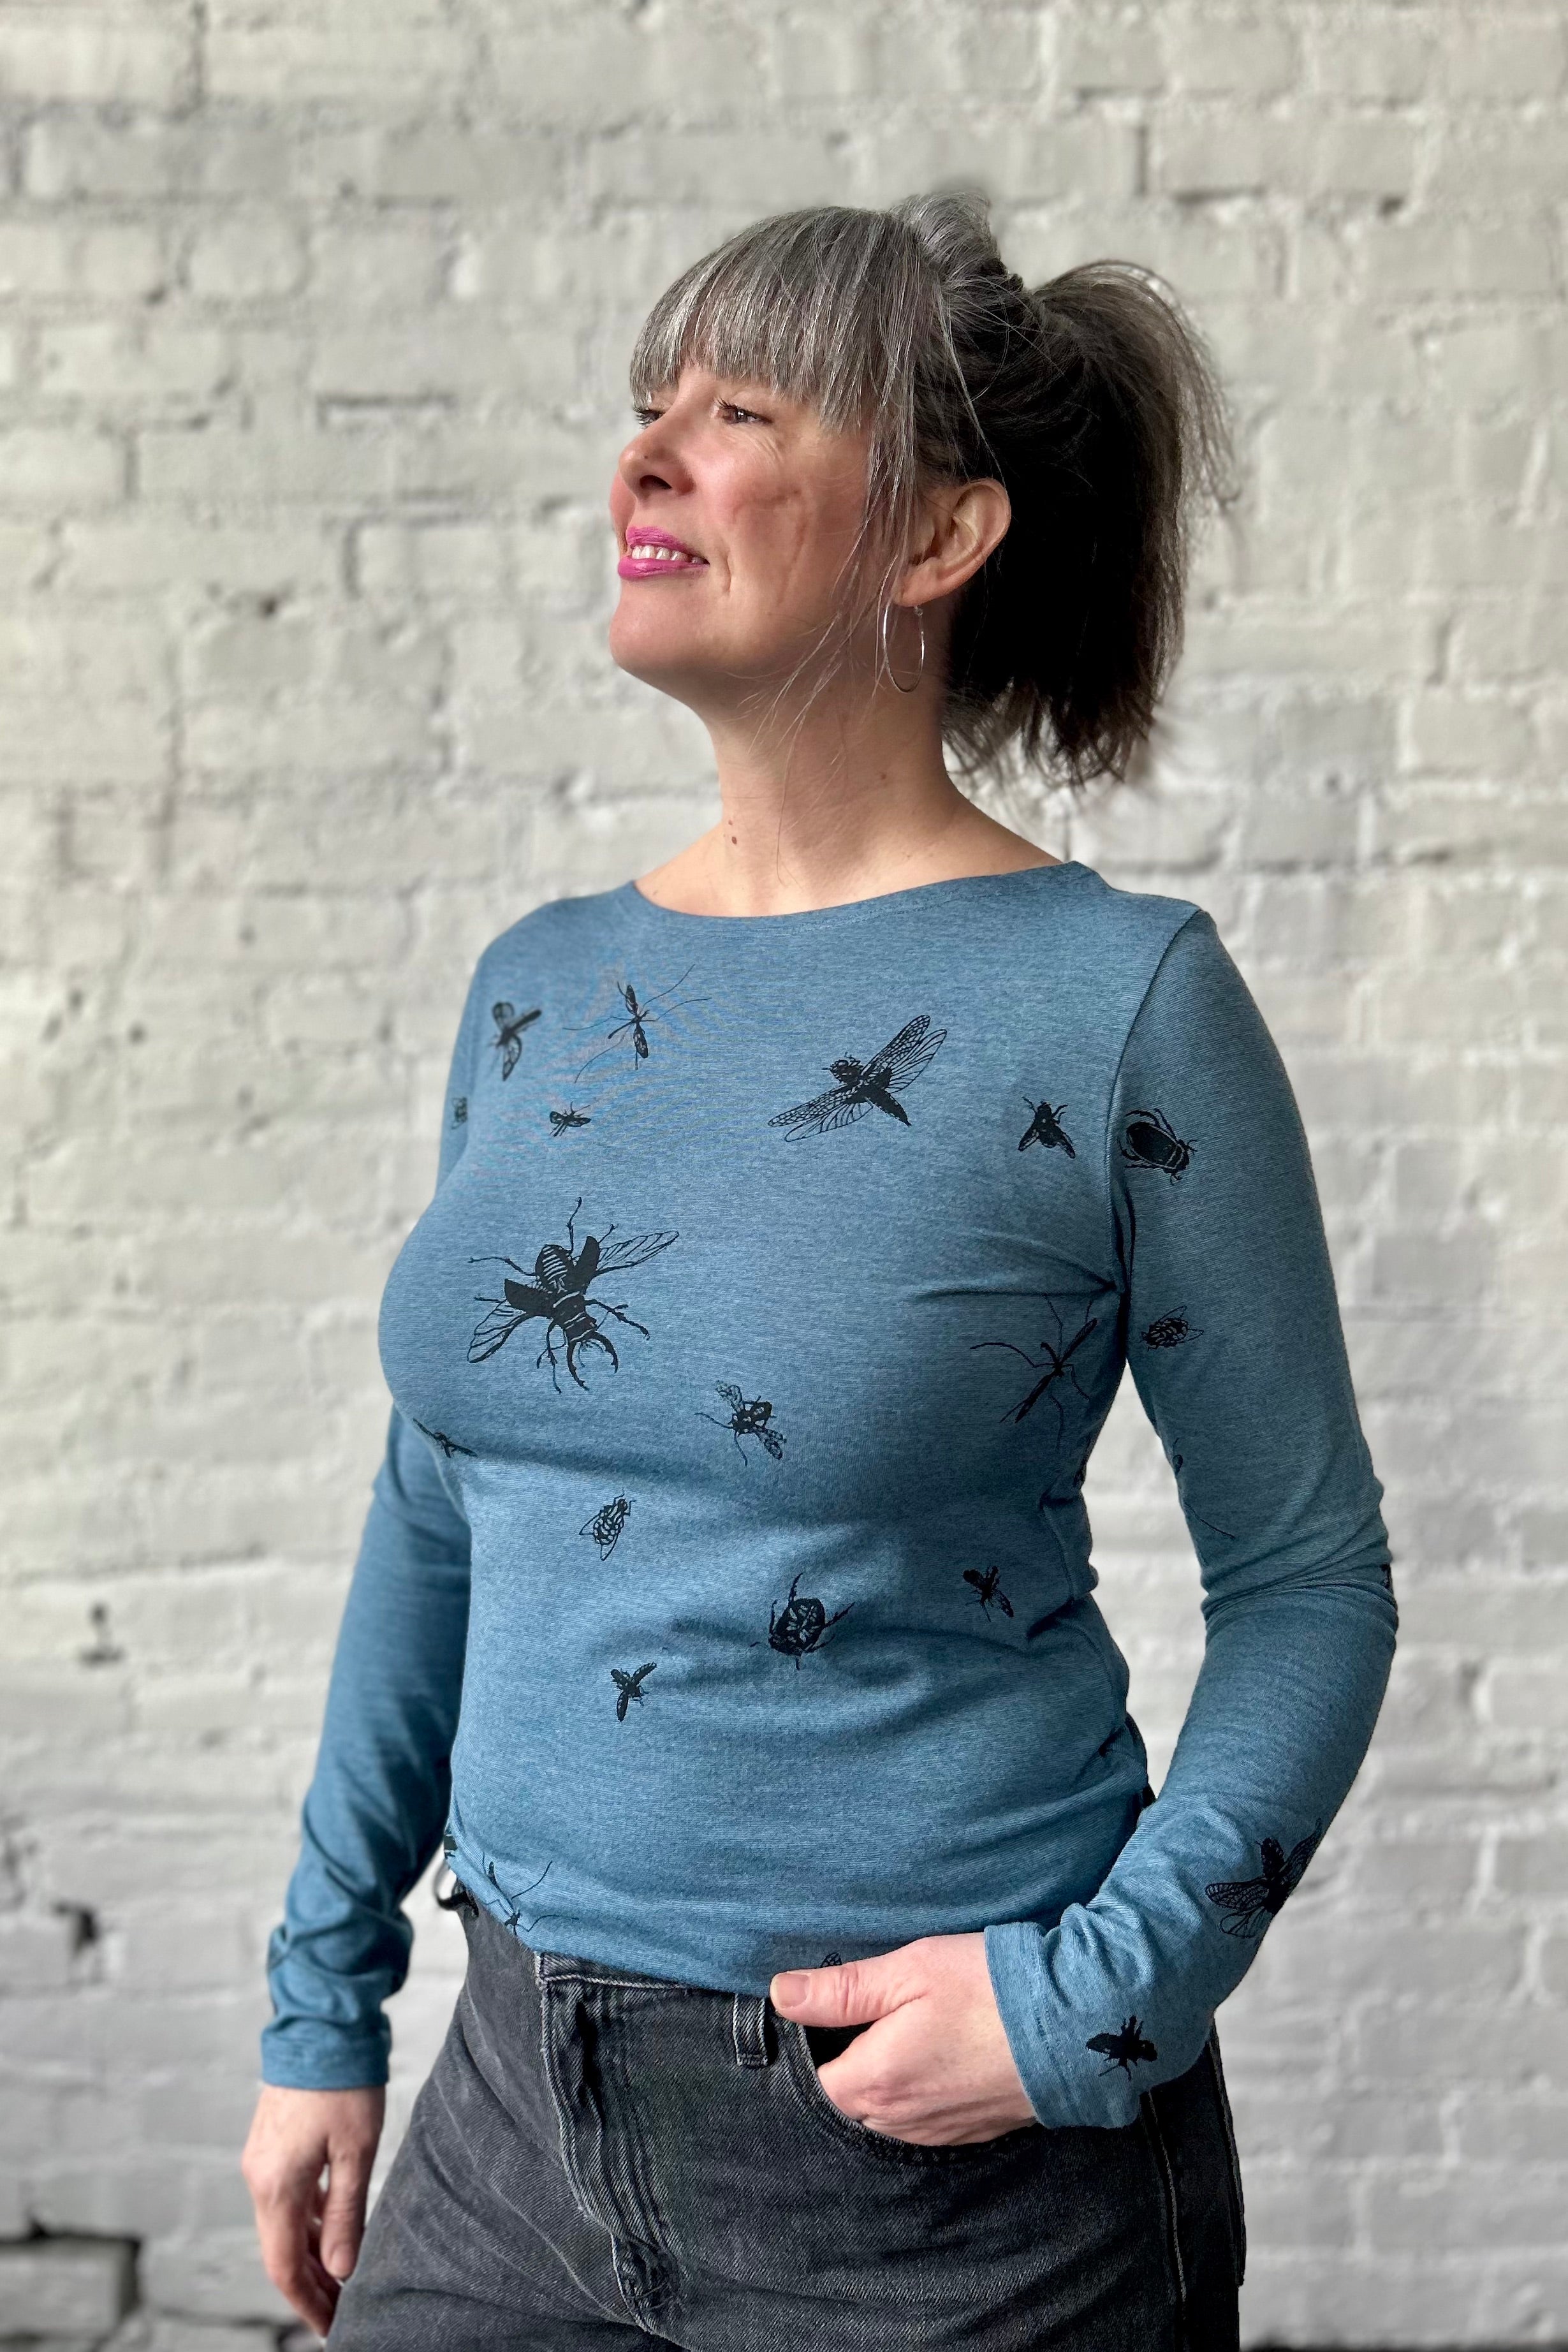 Smiling woman stands with a hand in pocket, modeling a blue microstriped long sleeve boatneck shirt. The shirt has black silkscreened bugs printed in on it in a large repeat pattern.